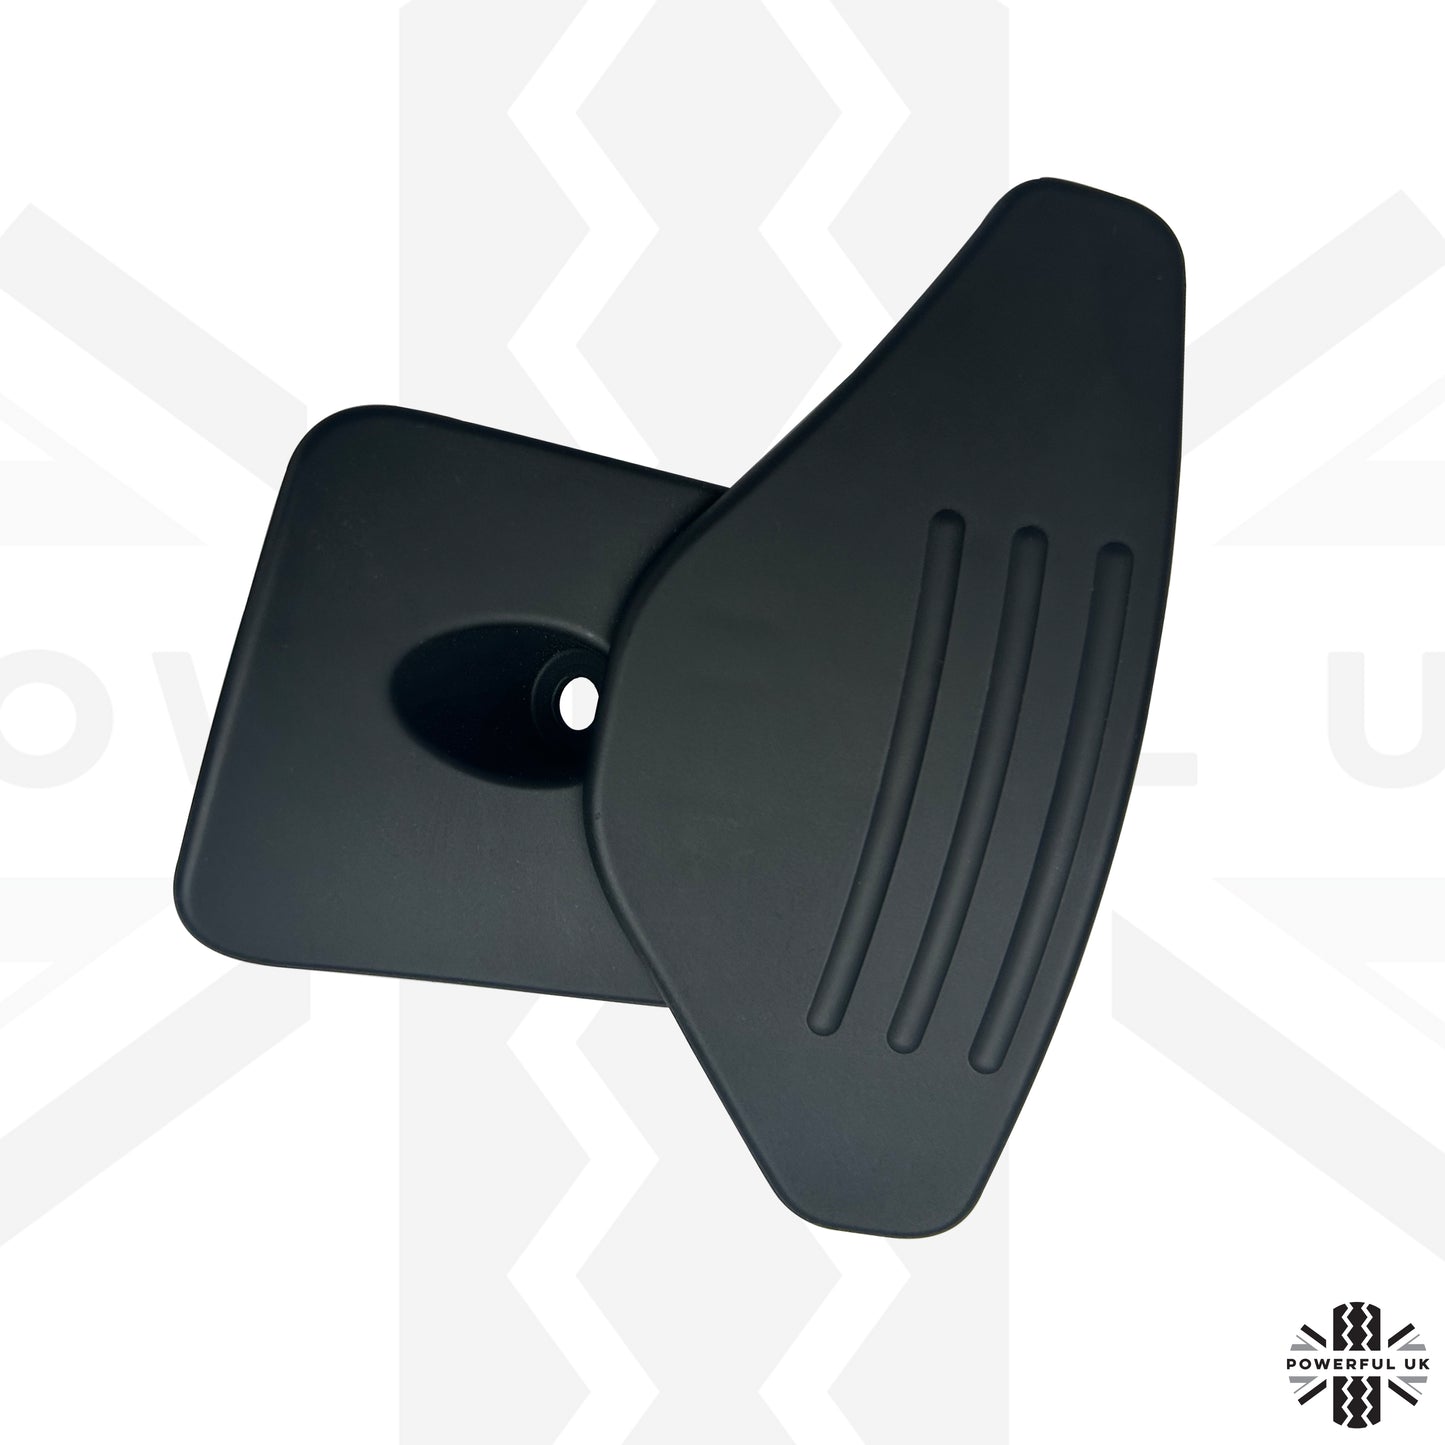 Black Paddle Shifts for Land Rover Discovery 5 - Pair